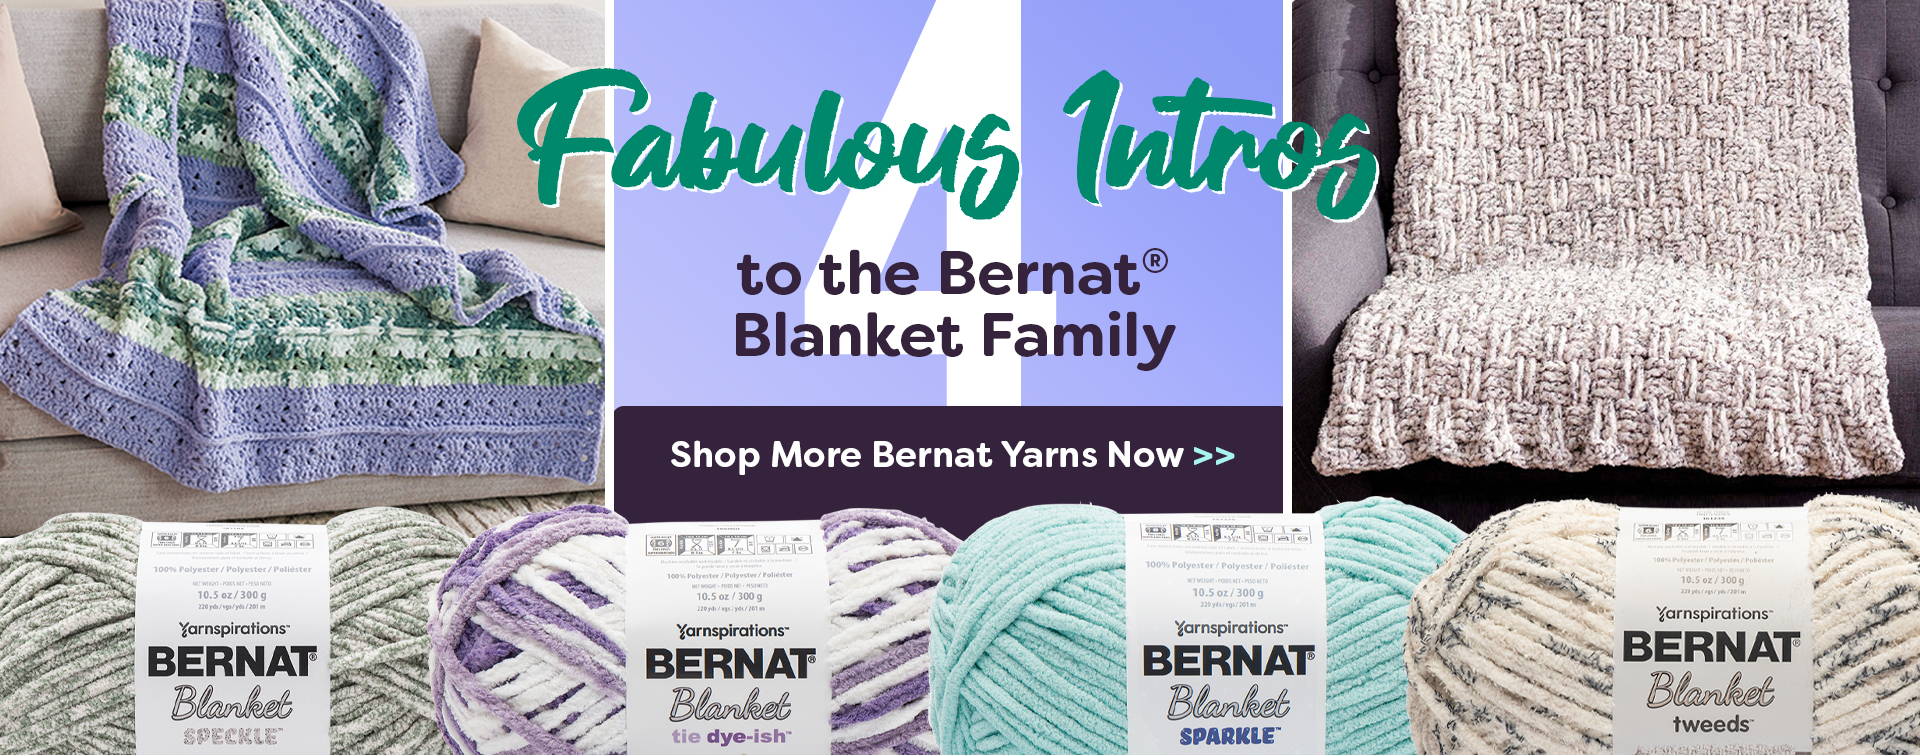 Four Fabulous Intros to the Bernat® Blanket Family of Yarns